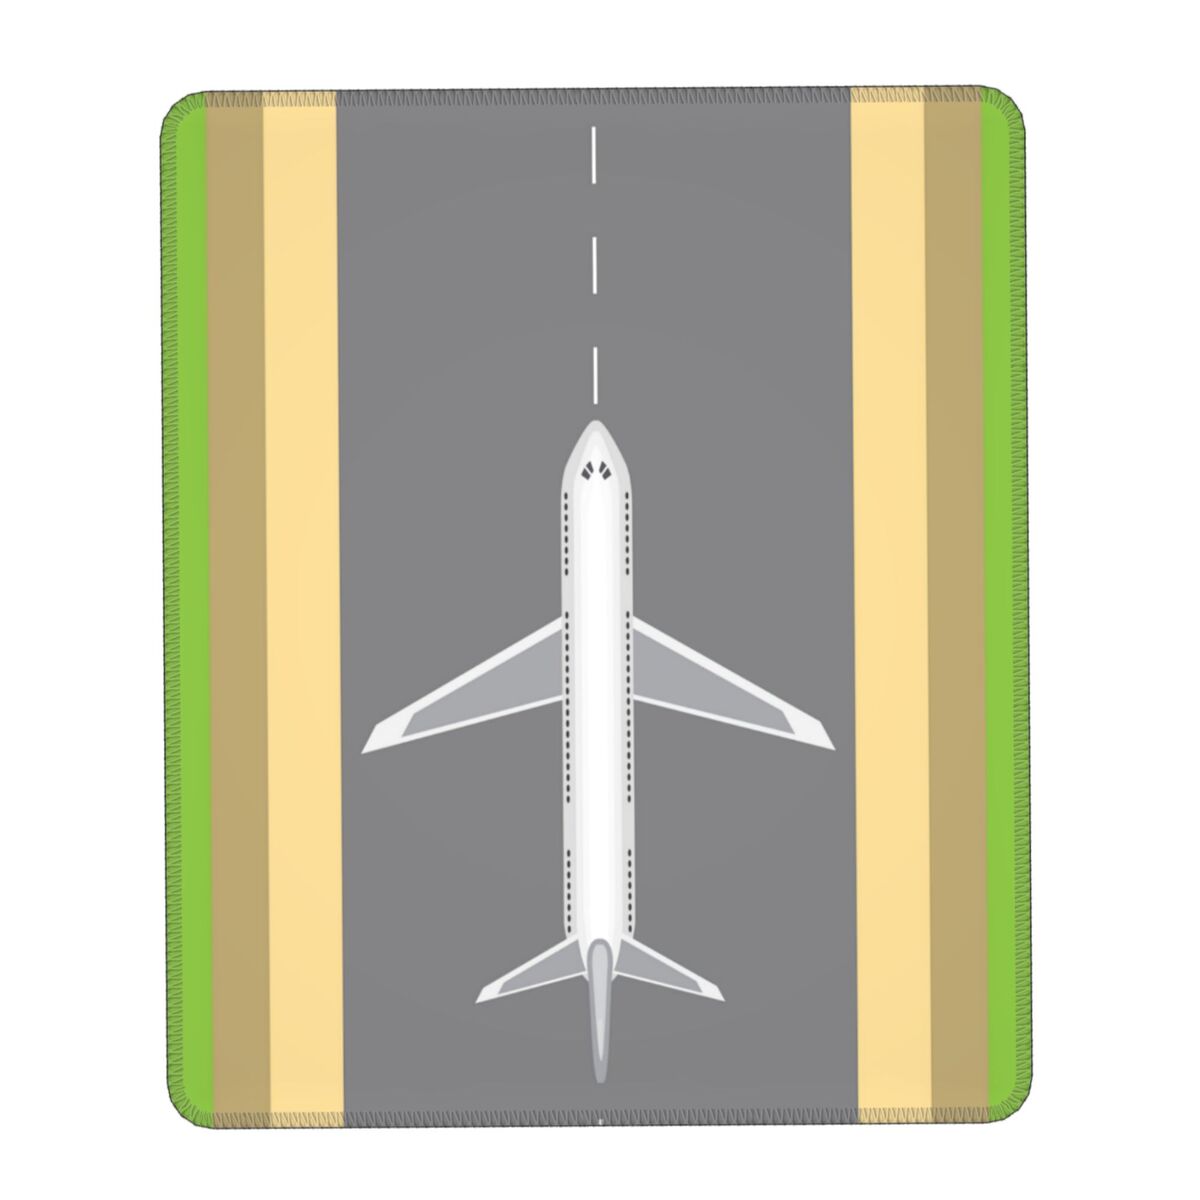 Aviation Airplane Aircraft Runway Computer Mouse Pad Square Mousepad Anti-Slip Rubber Pilot Aviator Desk Mat Pads for Gaming